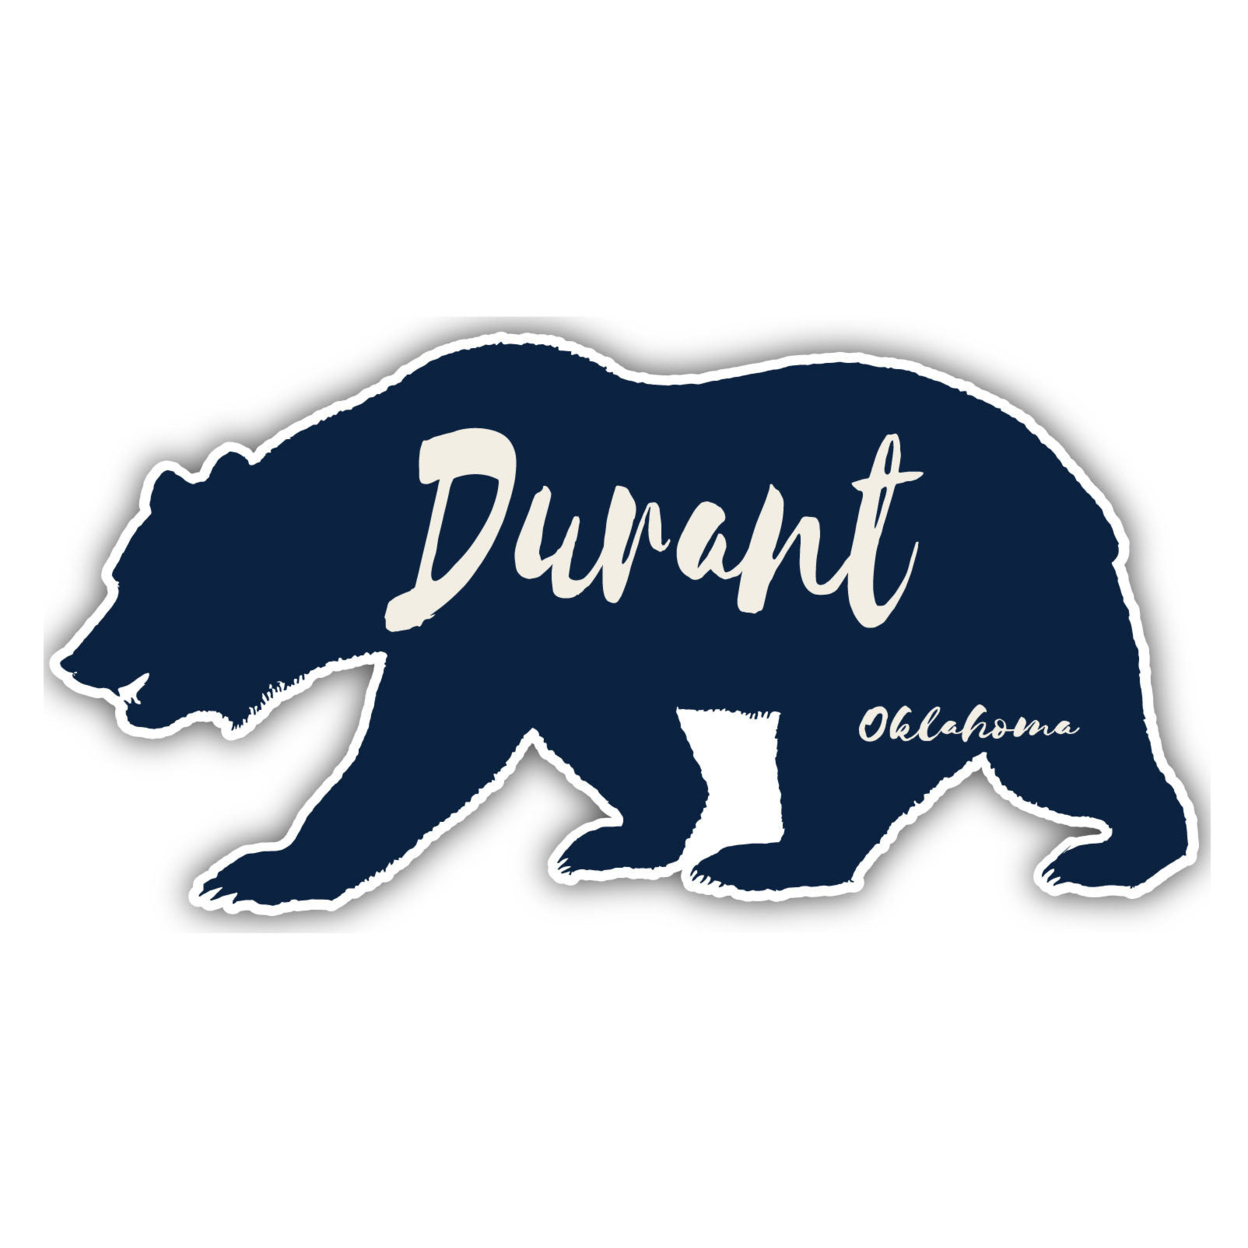 Durant Oklahoma Souvenir Decorative Stickers (Choose Theme And Size) - 4-Pack, 12-Inch, Tent